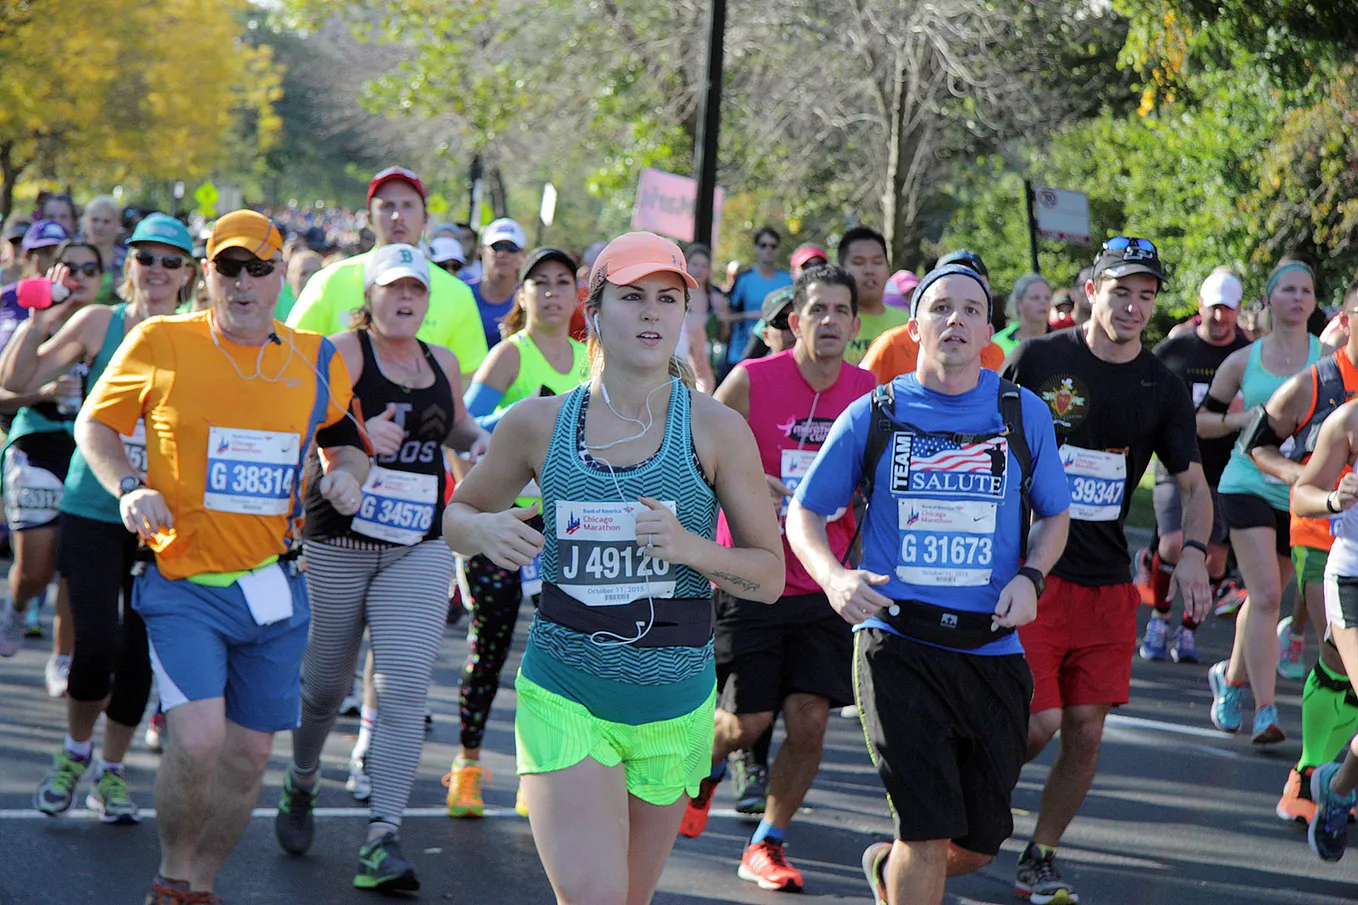 Are More Runners Qualifying for the Chicago Marathon Than In the Past?